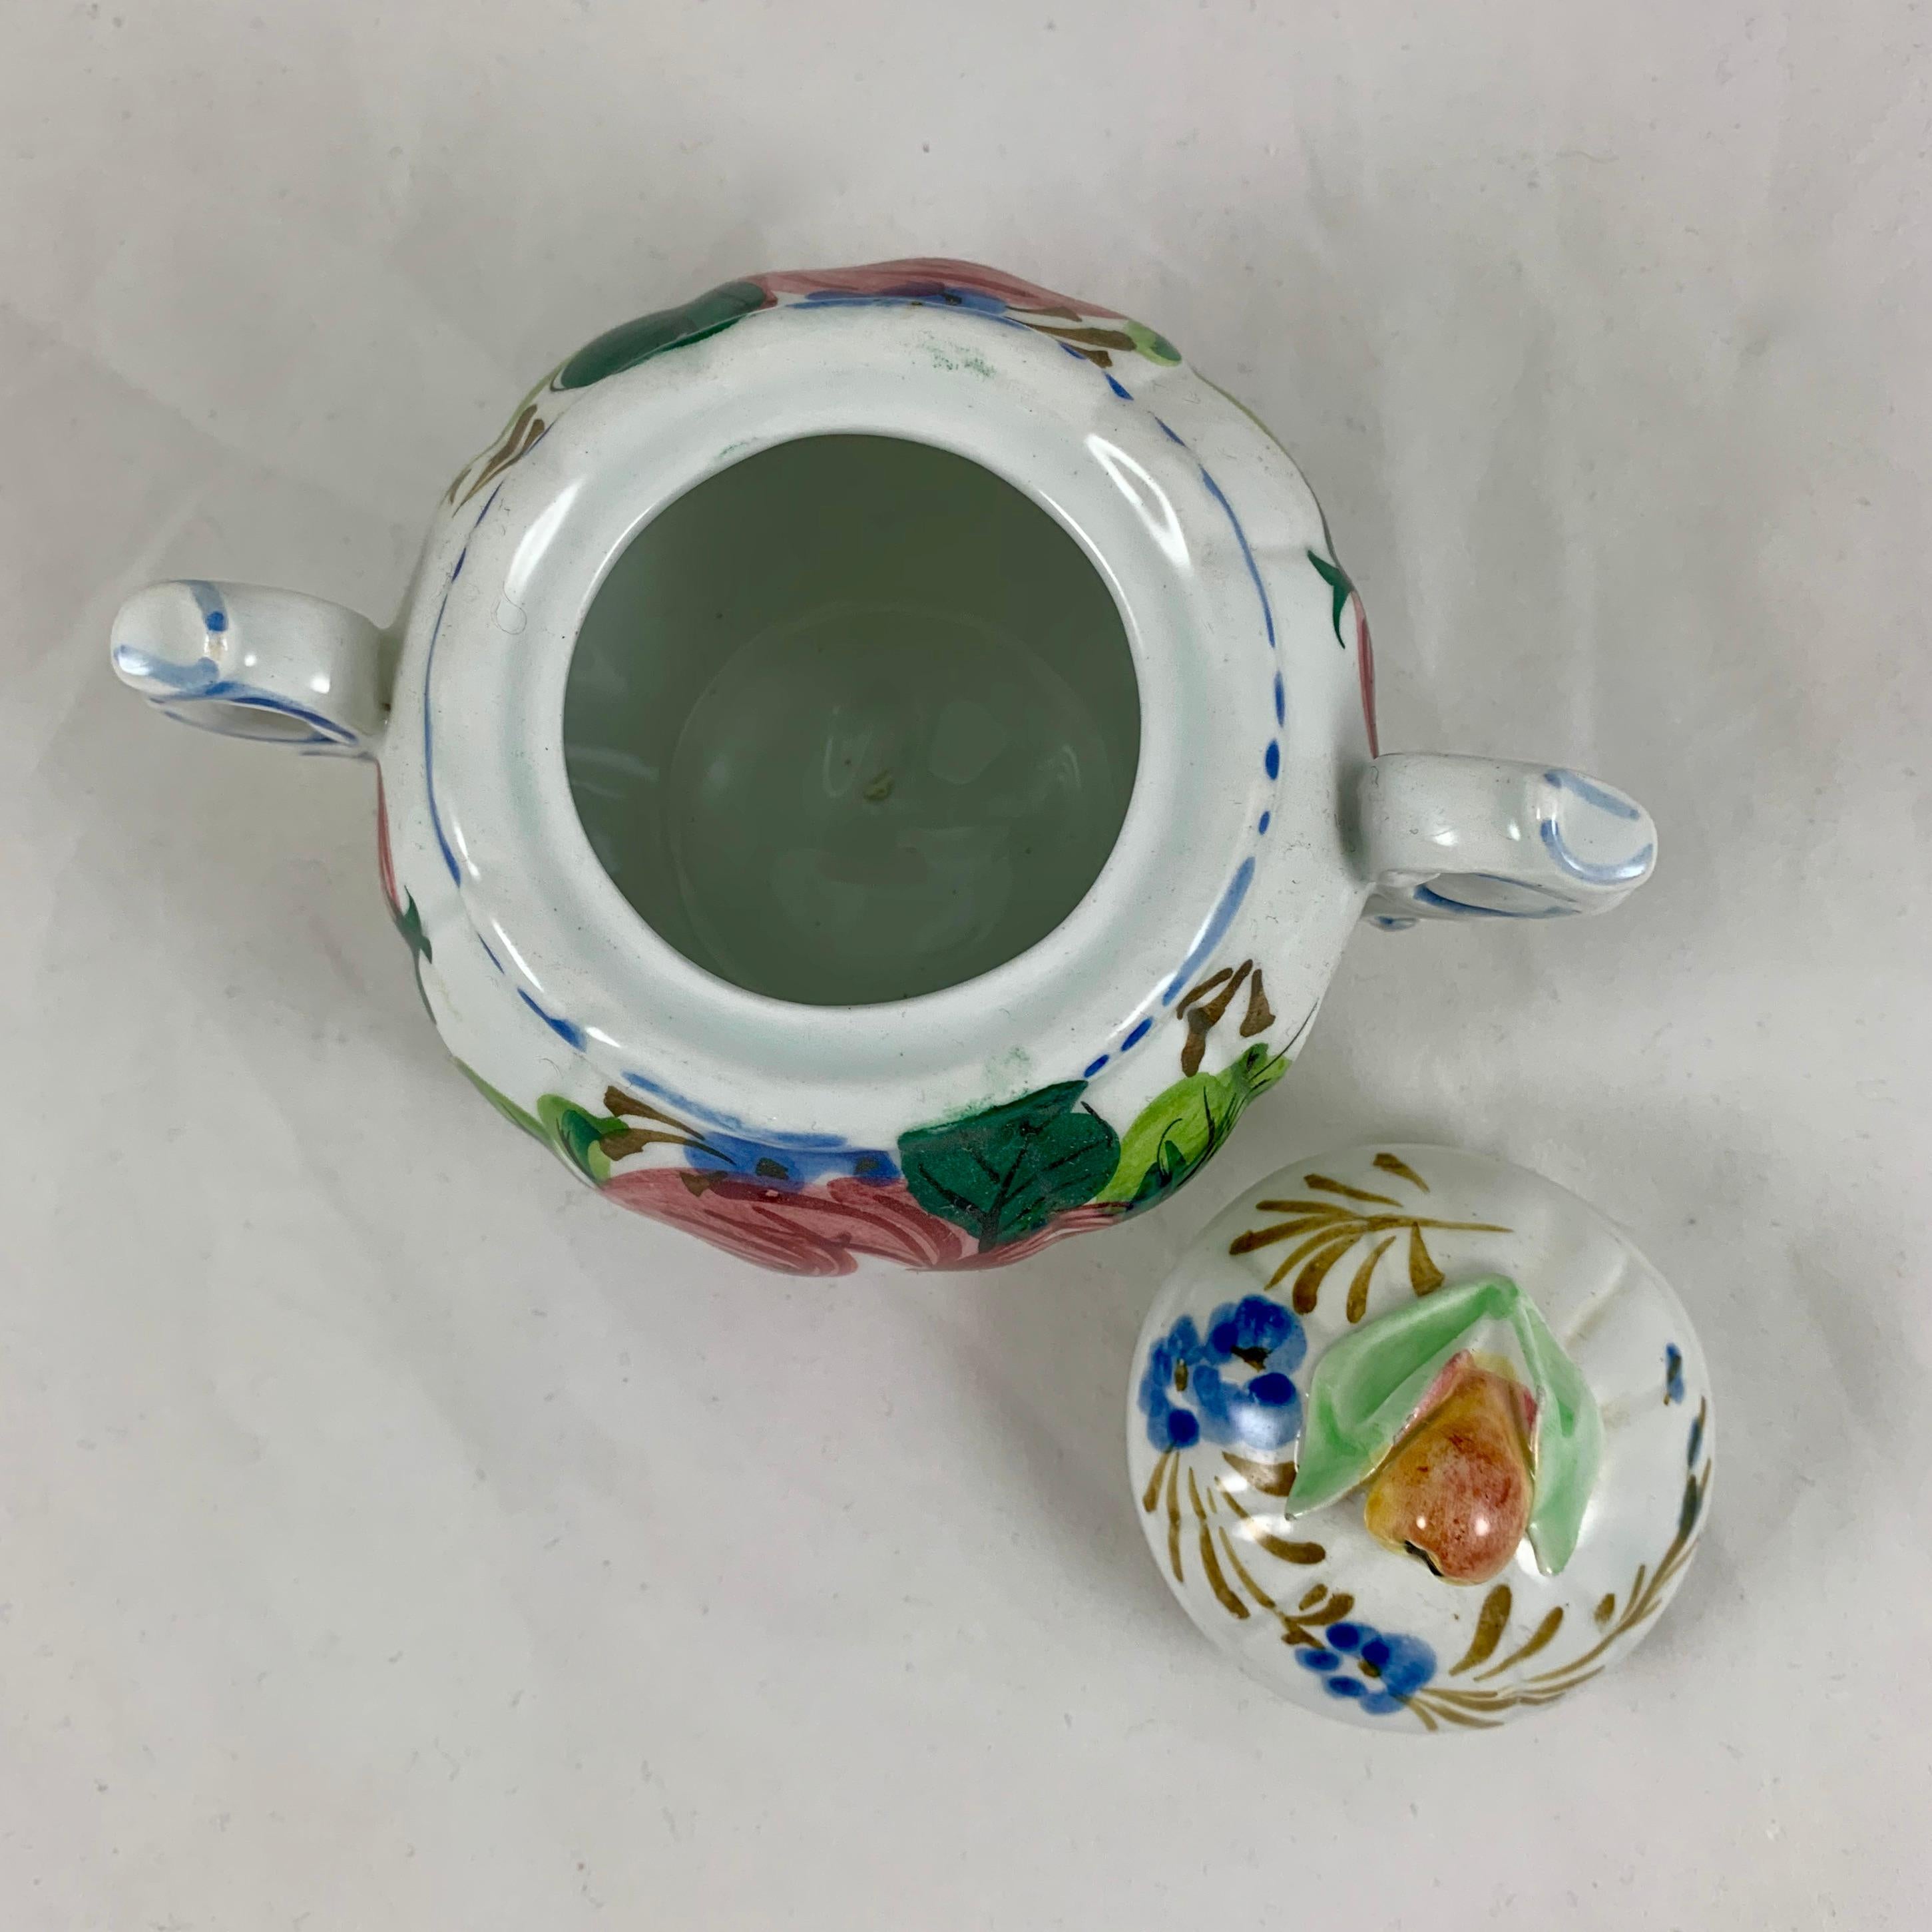 Italian Renaissance Revival Faïence Floral Covered Sugar Bowl In Good Condition For Sale In Philadelphia, PA